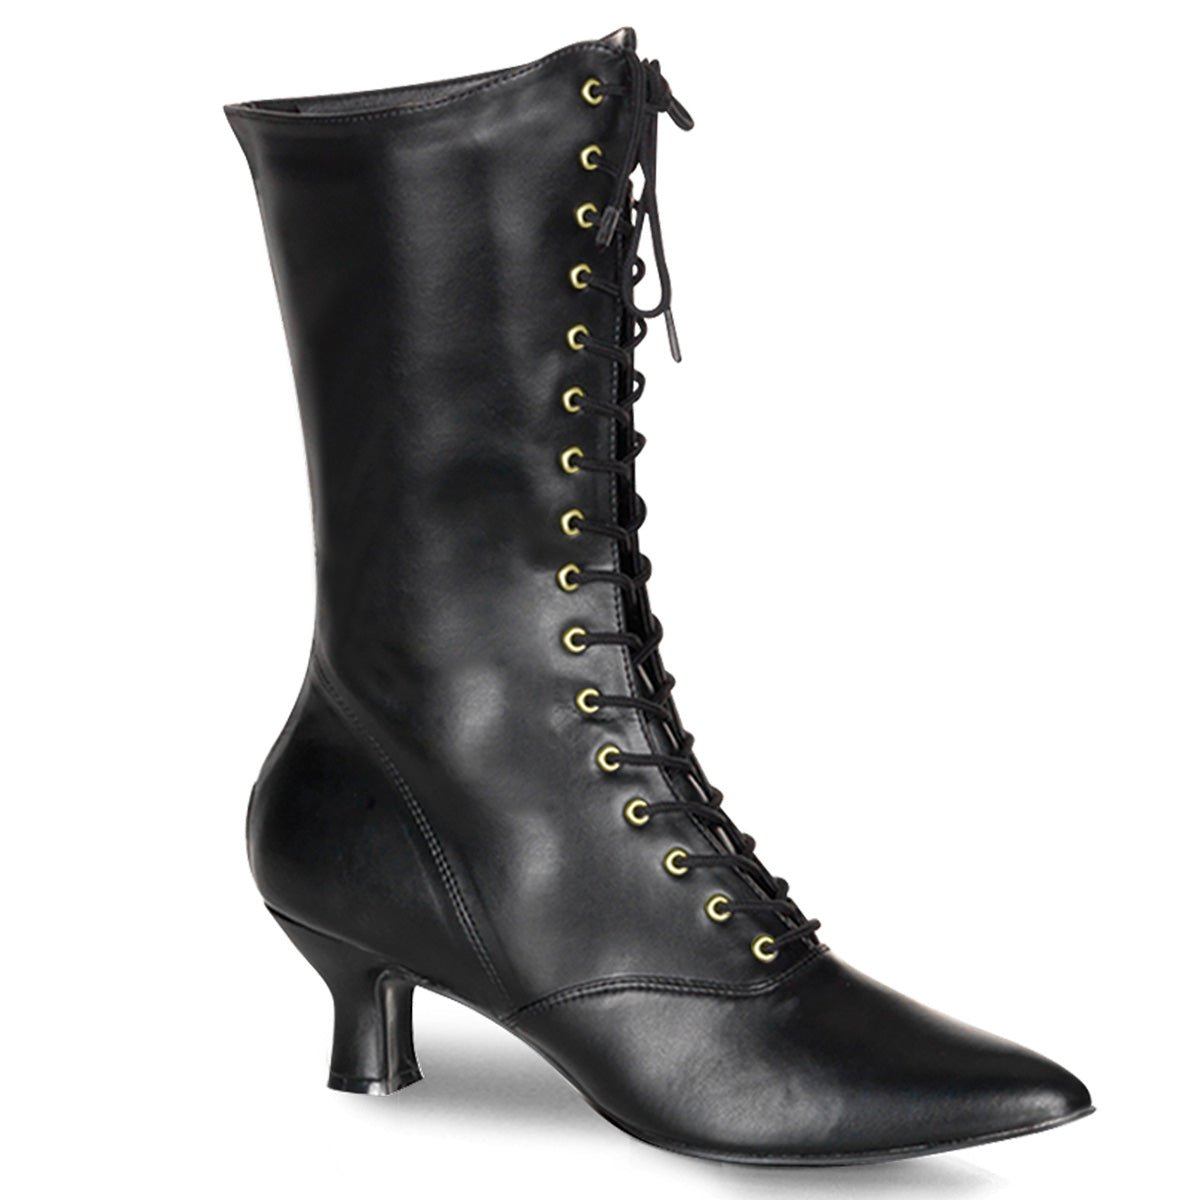 Clearance Funtasma Victorian 120 Black Size 6UK/9USA - From Clearance Sold By Alternative Footwear